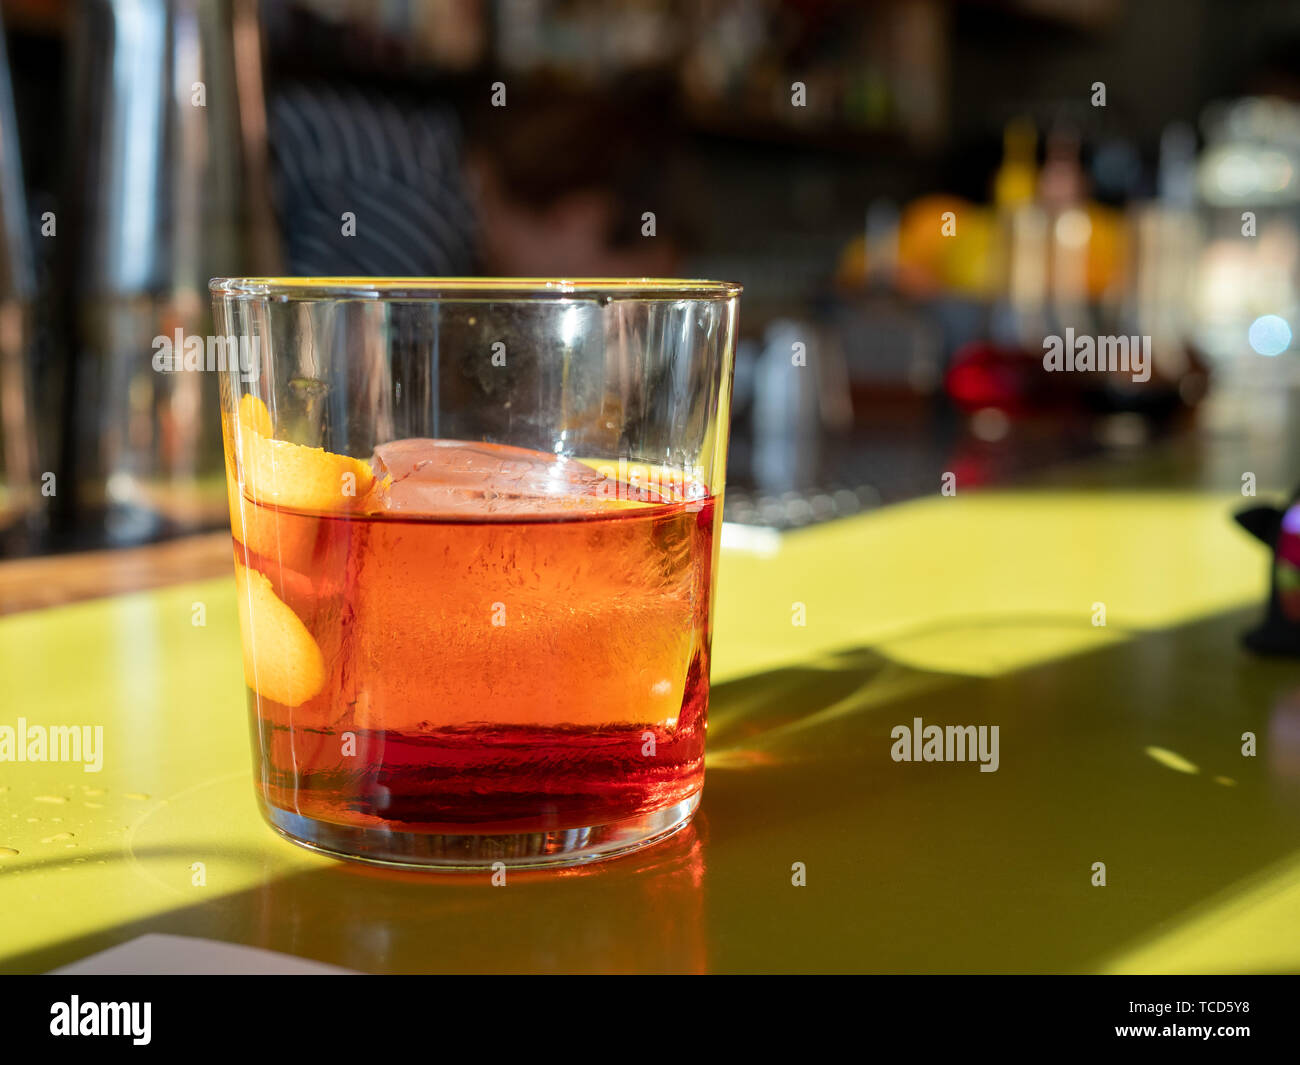 Negroni drink sitting on green bar counter top Stock Photo